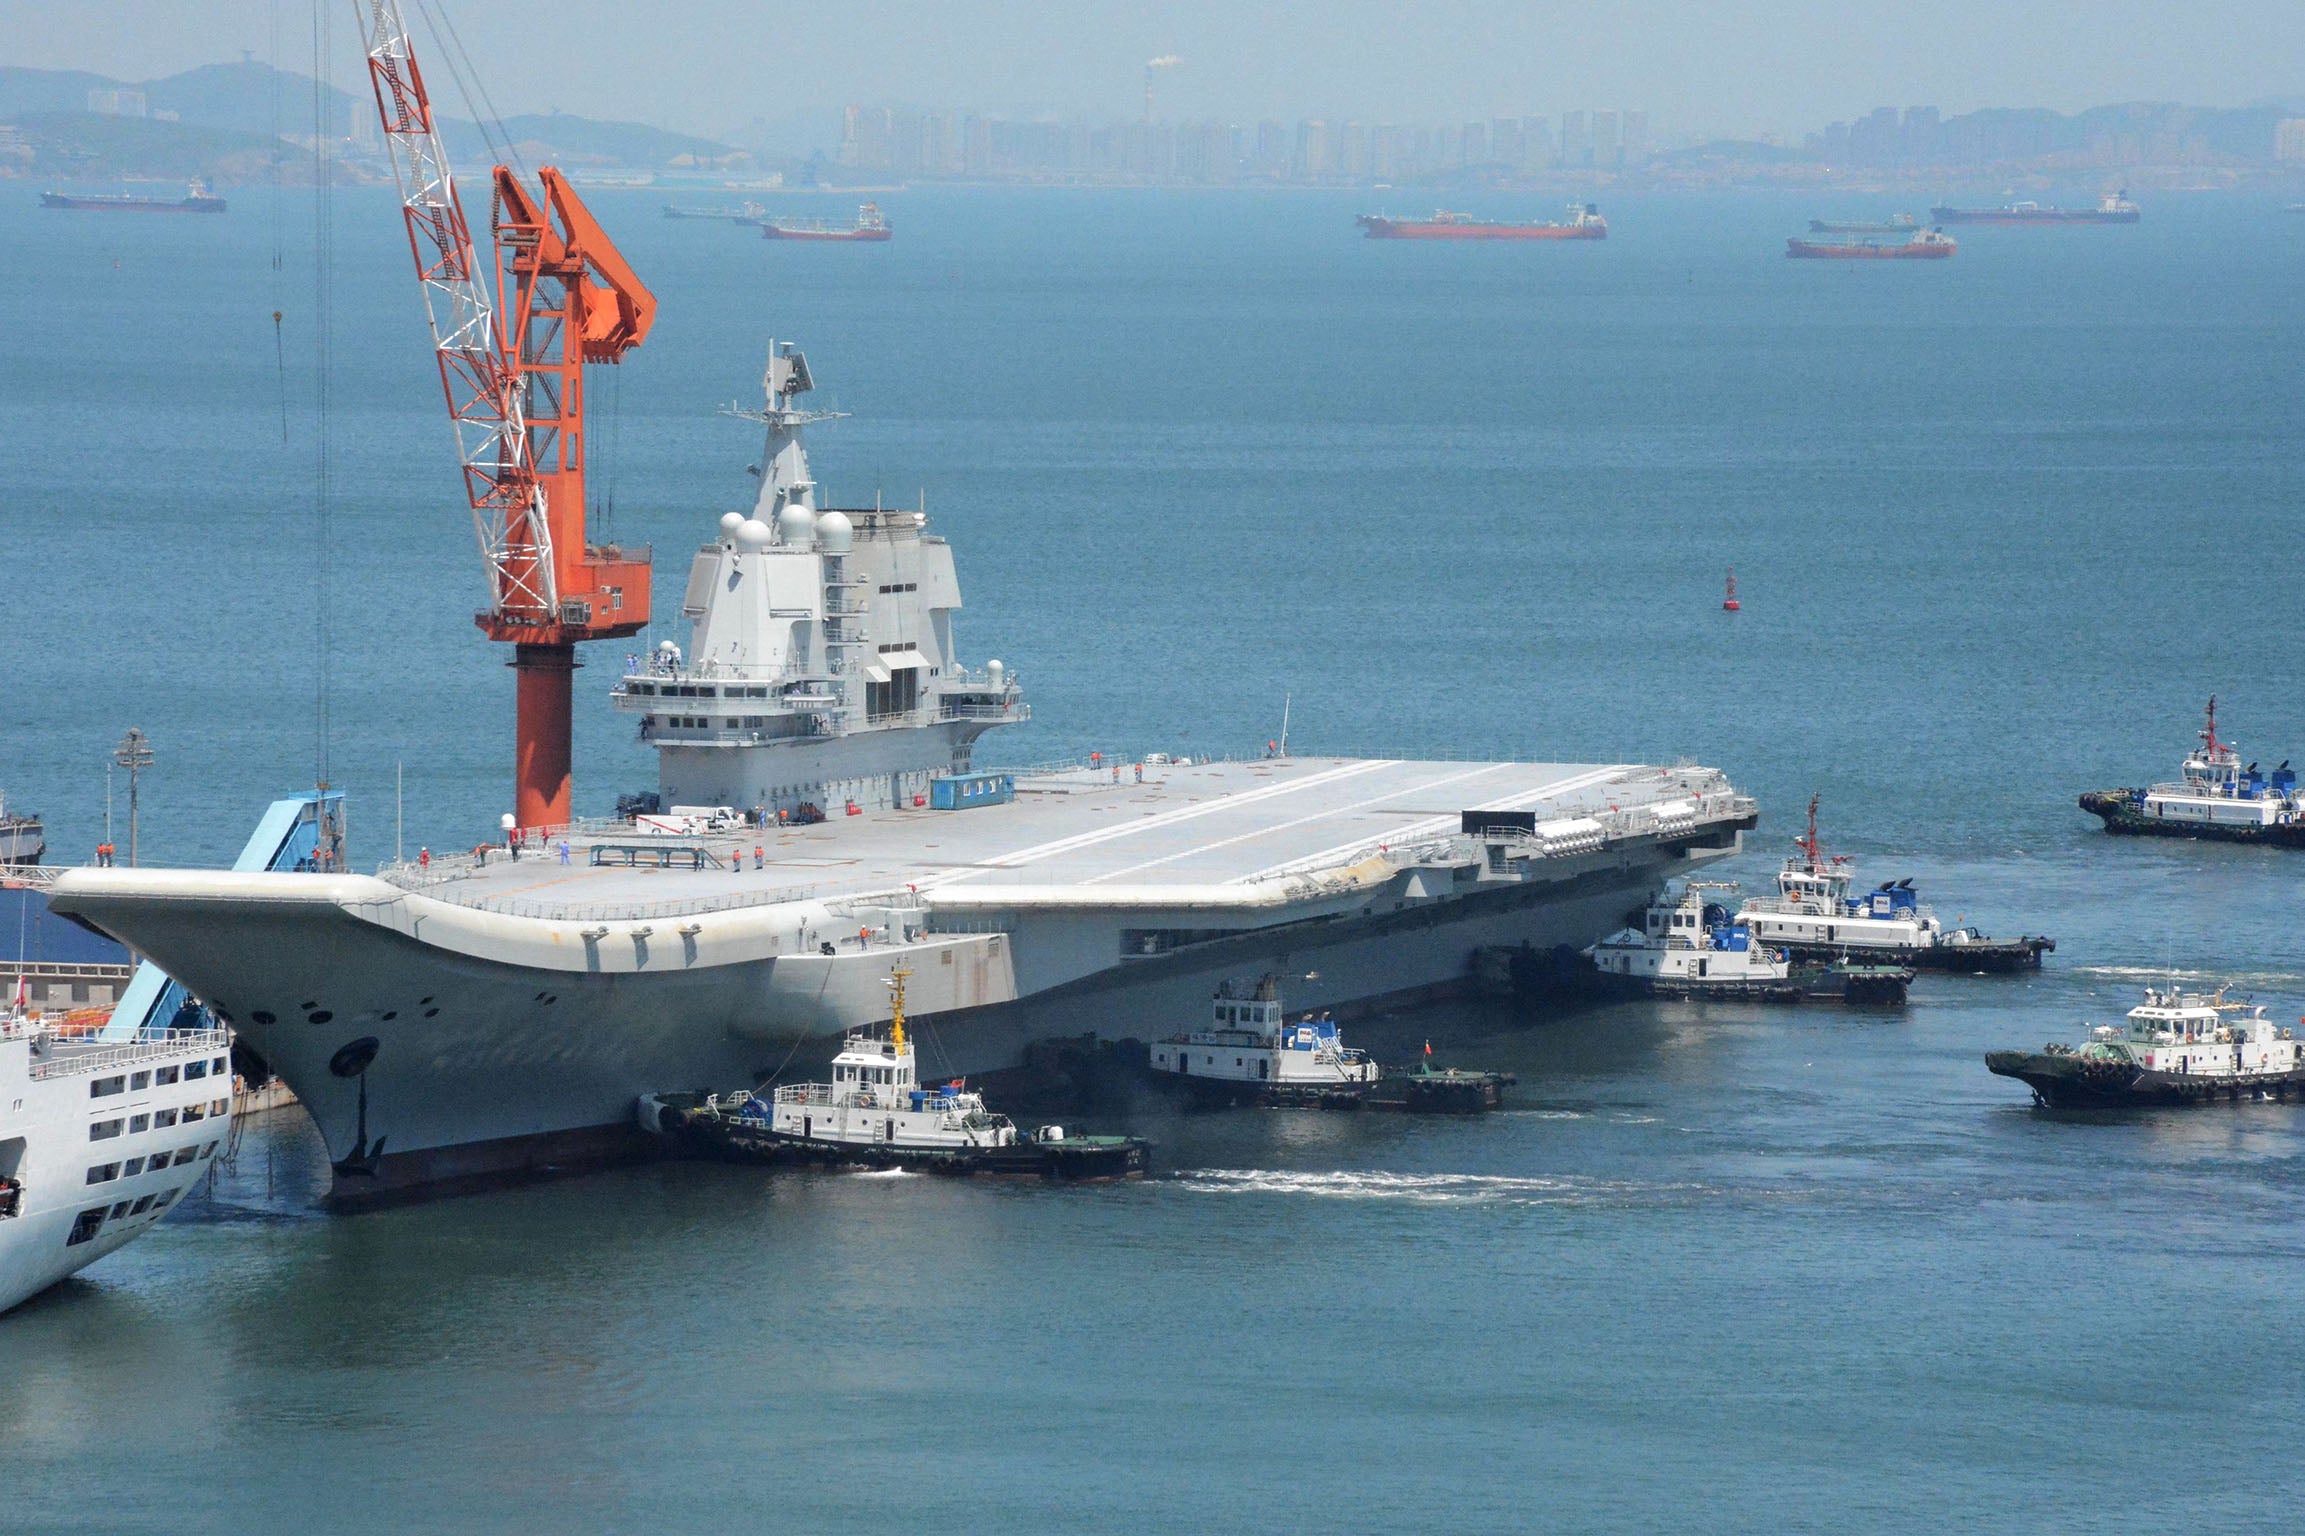 China's first domestically manufactured aircraft carrier returns to port in Dalian after sea trials on 18 May 2018